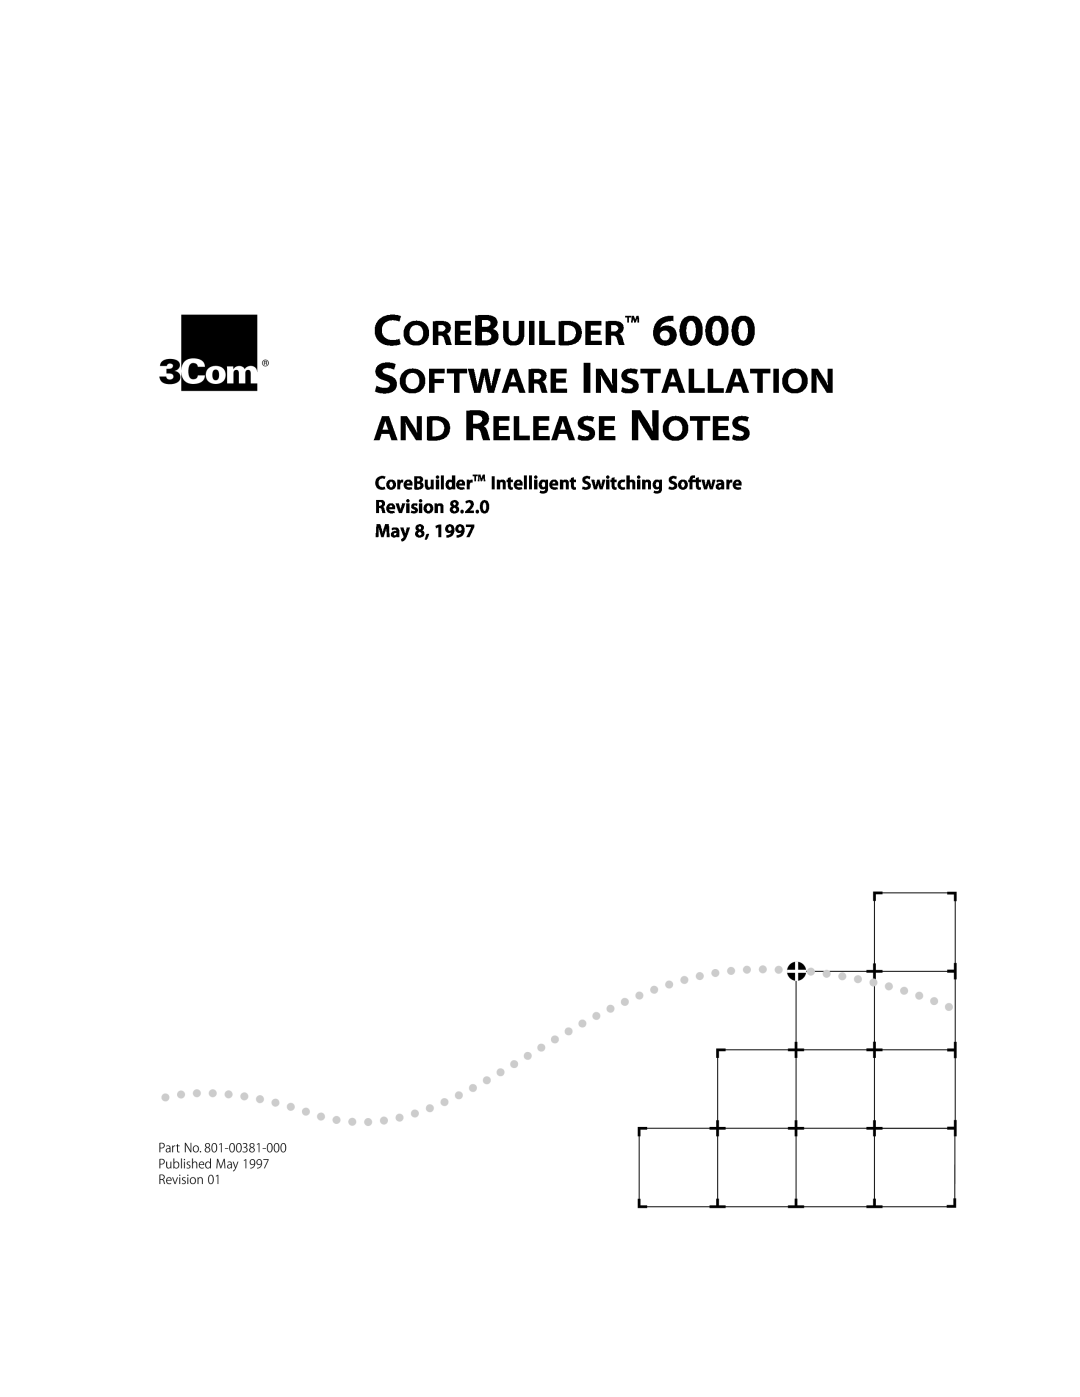 3Com 6000 manual Software Installation And Release Notes, Corebuilder 